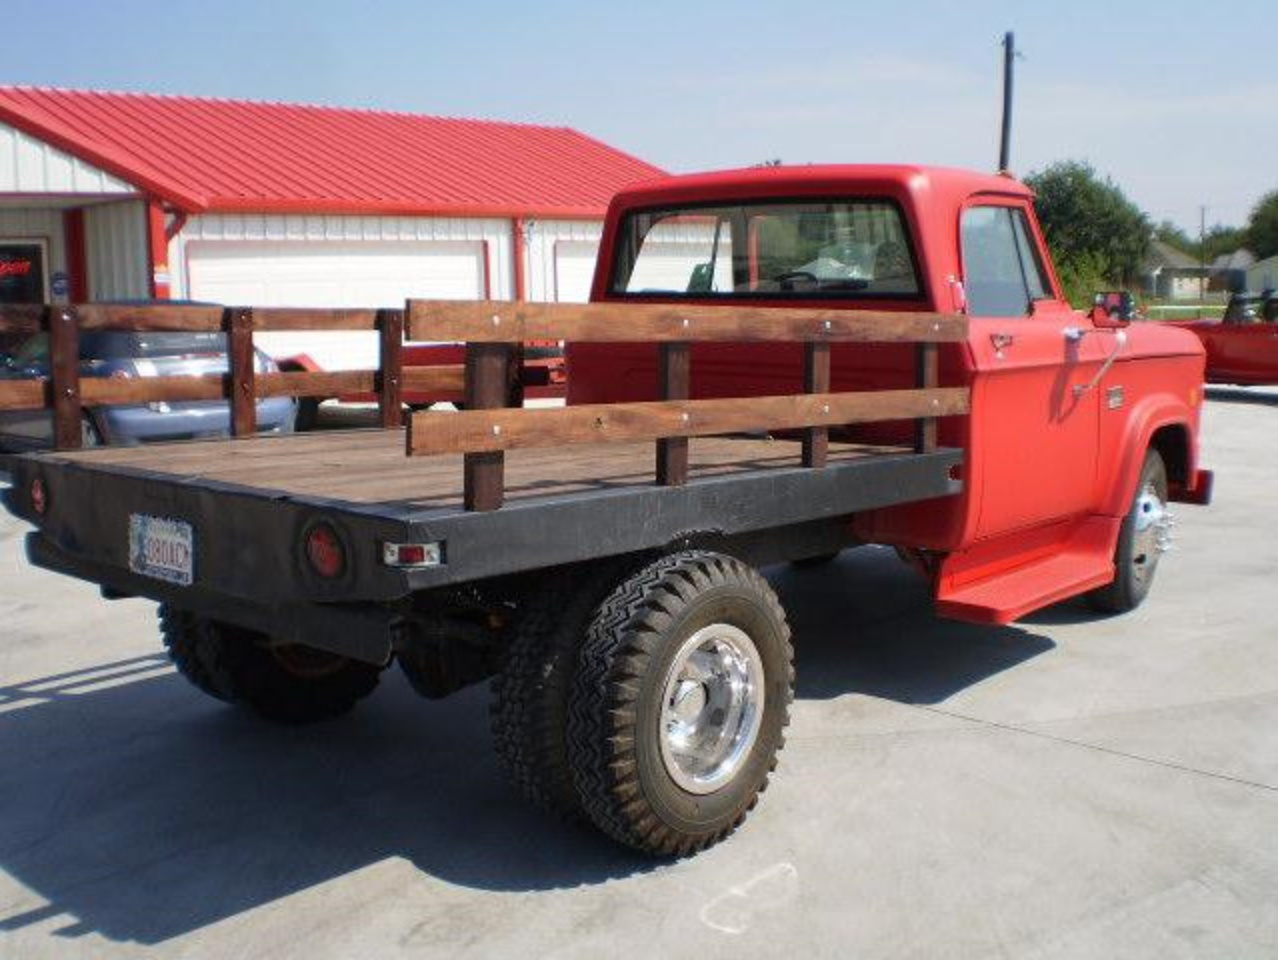 yet has a very rustic appeal to it, a 1969 Dodge D300.